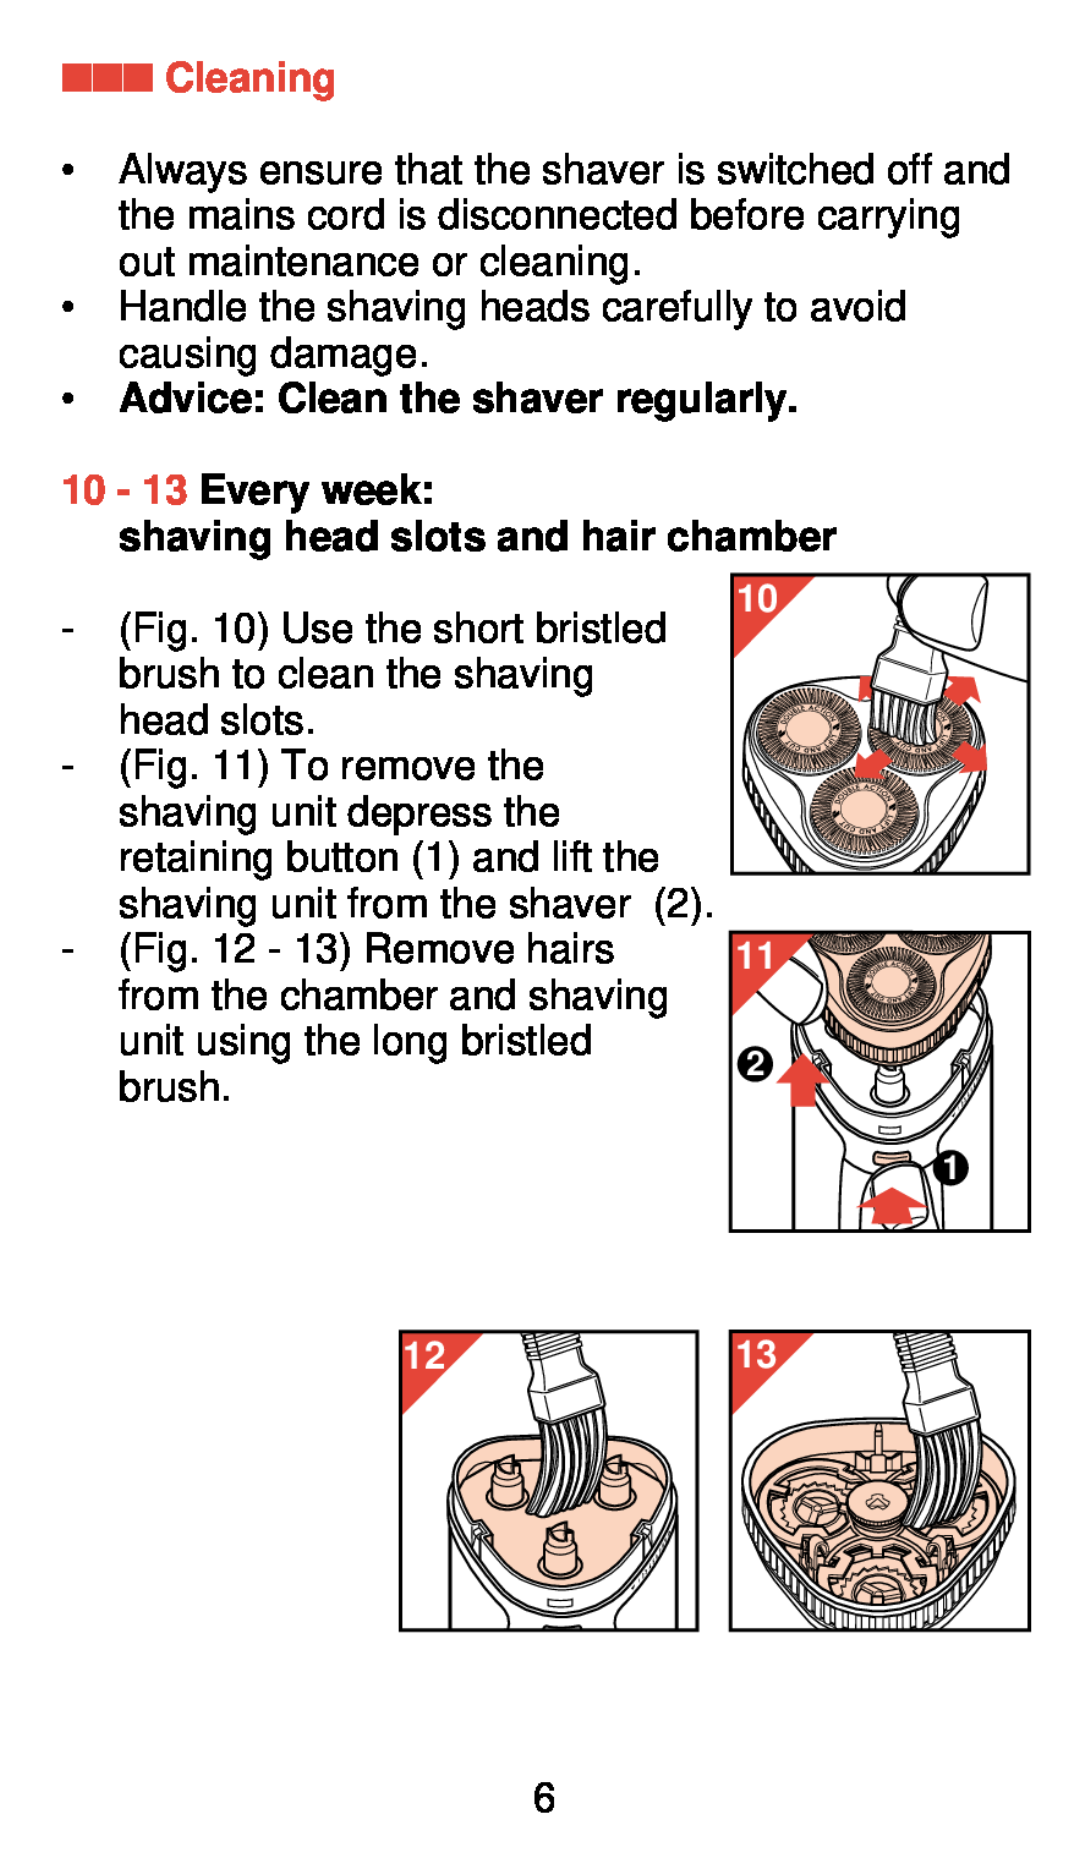 Philips 775 manual Cleaning, Advice Clean the shaver regularly, 10 - 13 Every week, shaving head slots and hair chamber 